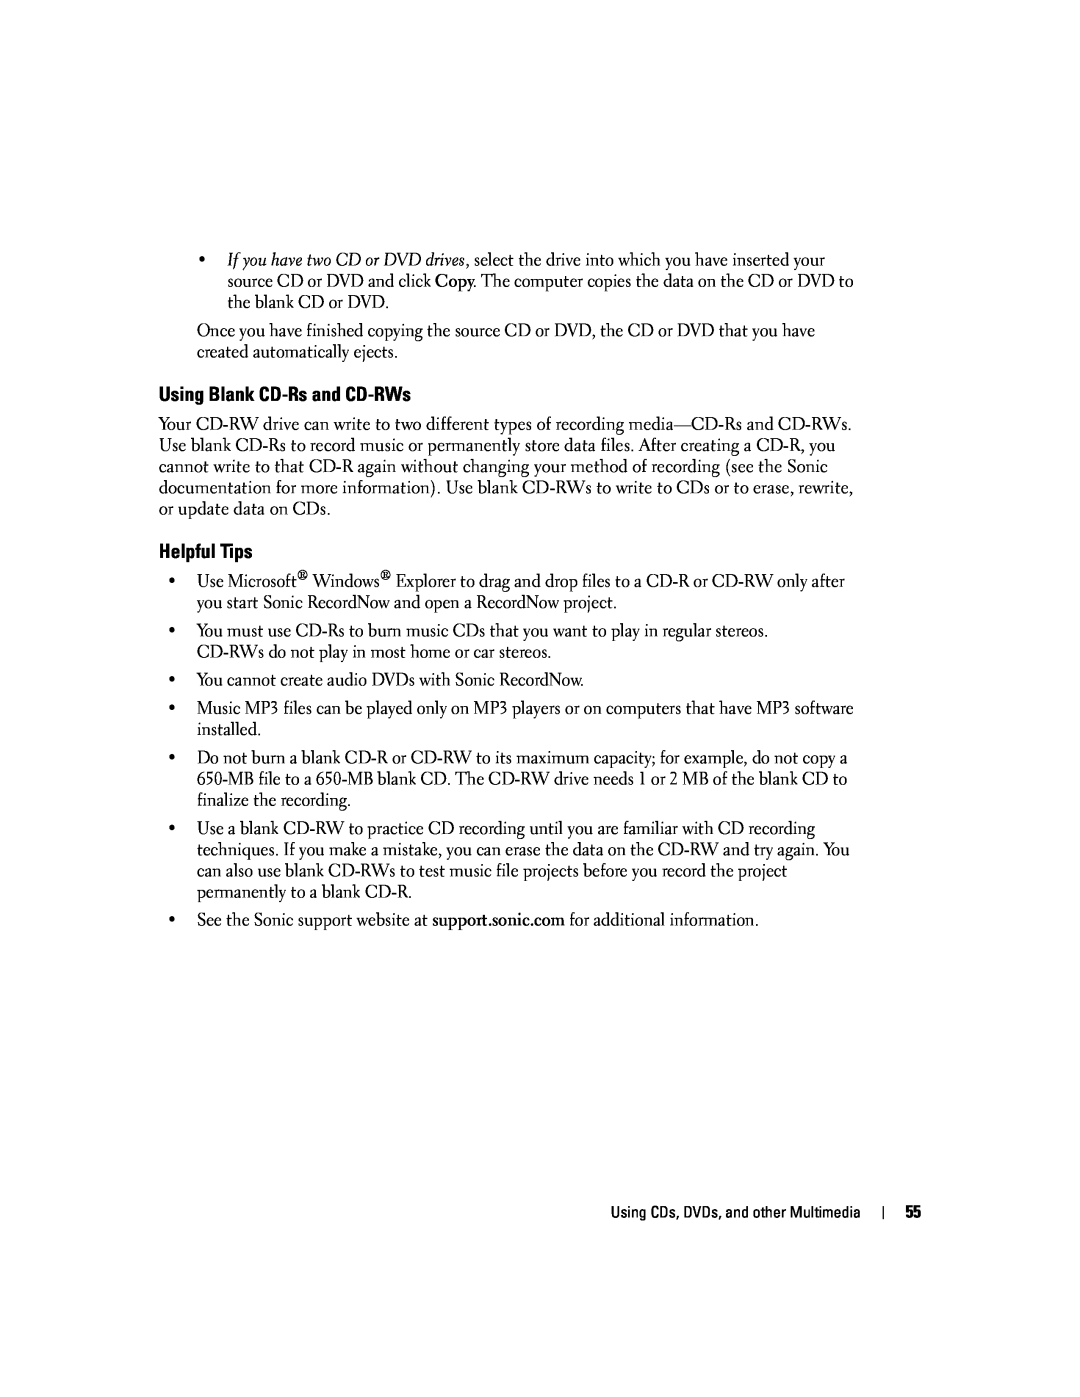 Dell PP10L owner manual Using Blank CD-Rs and CD-RWs, Helpful Tips 